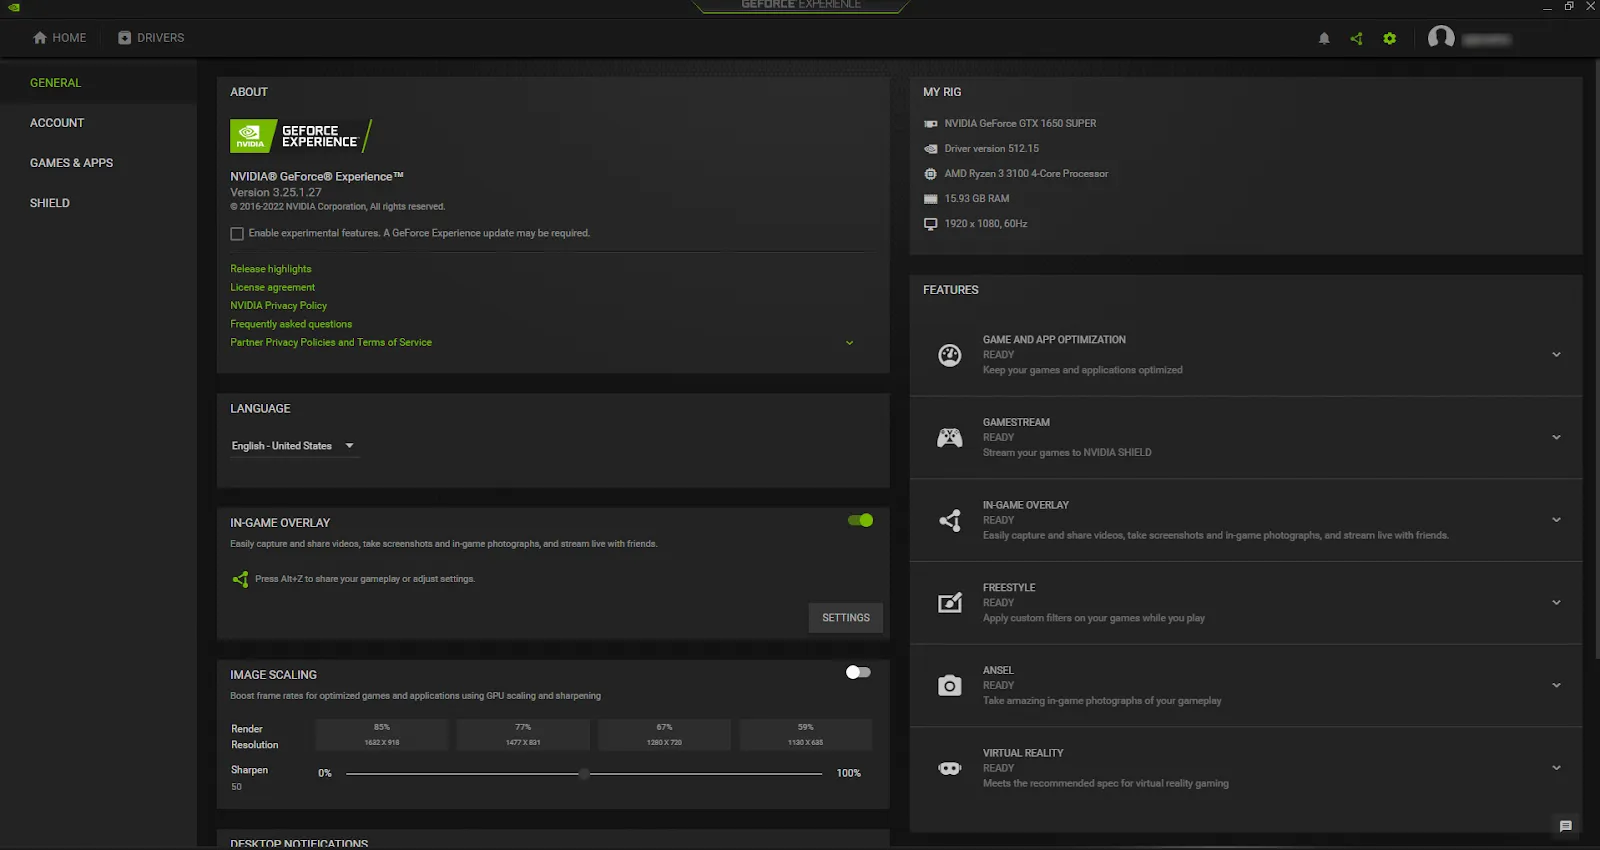 You'll need to register an account to use GeForce Experience.